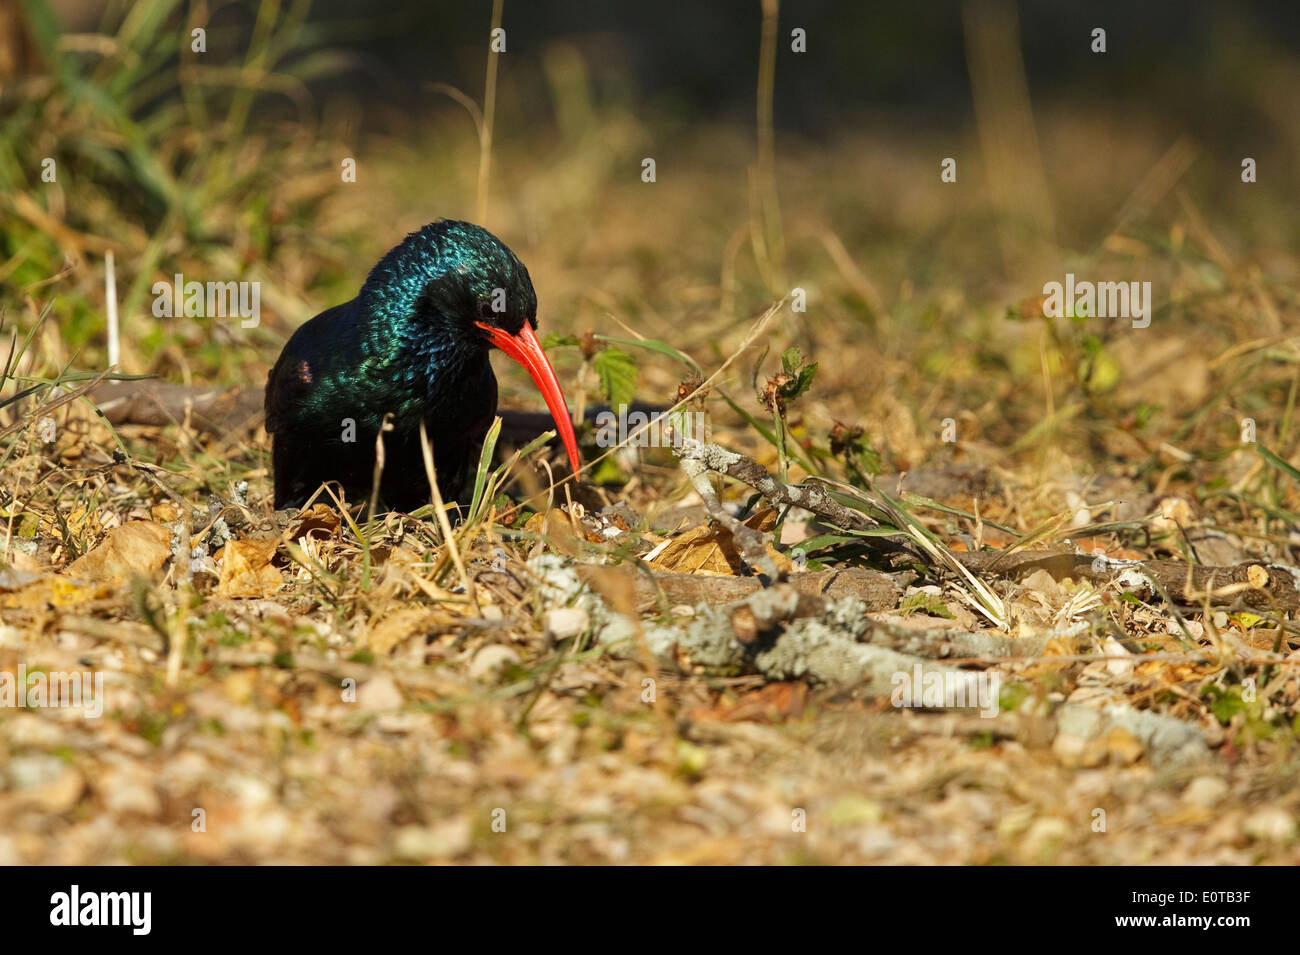 Green Wood Hoopoe (Phoeniculus purpureus marwitzi) on the ground, Kruger National Park, South Africa Stock Photo